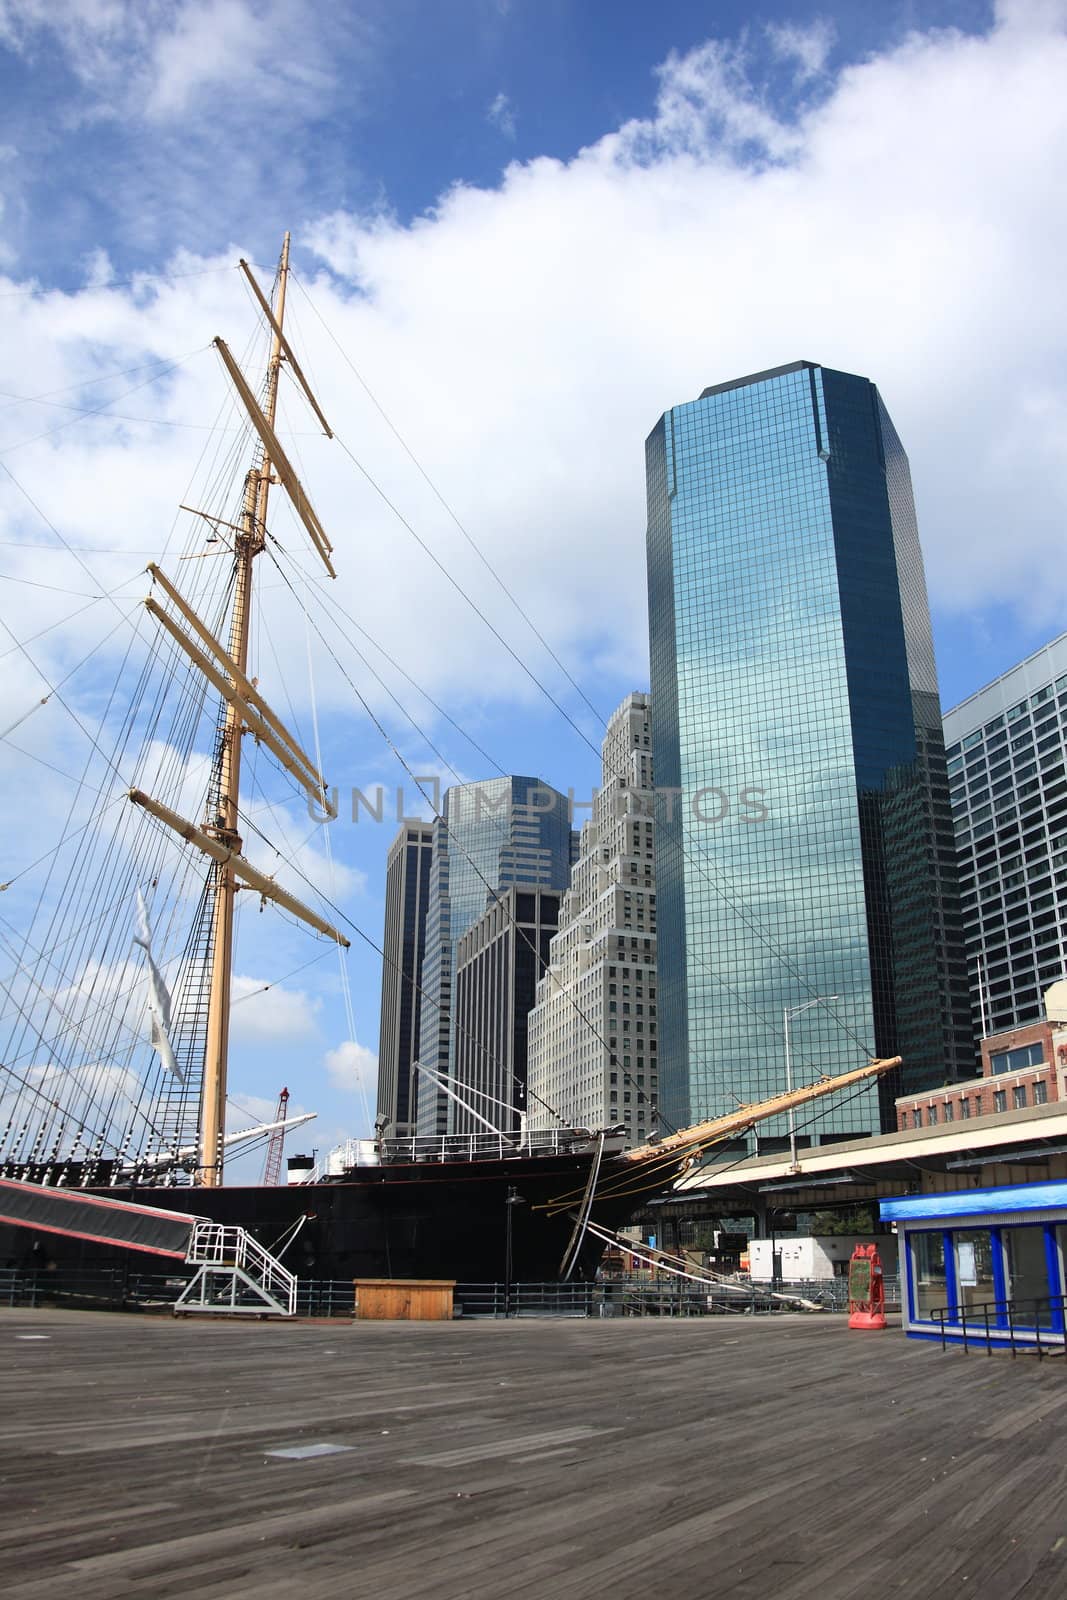 South Street Seaport - New York by Ffooter